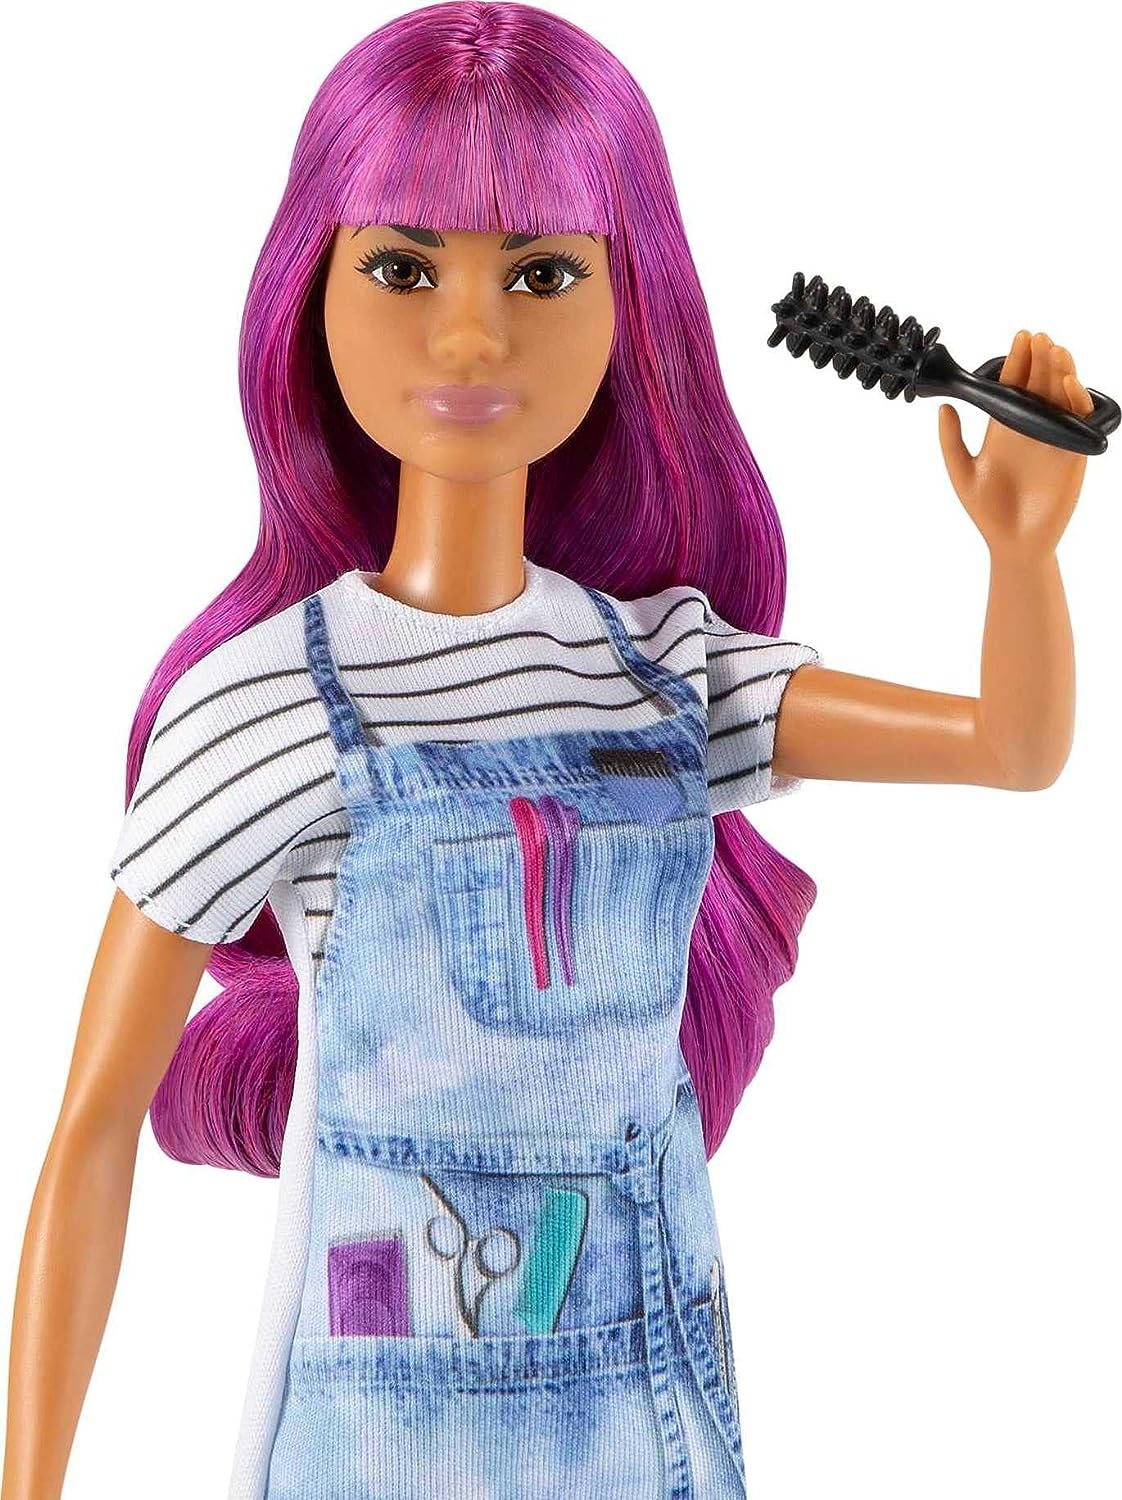 Barbie 12 Inch Salon Stylist Doll with Purple Hair & Accessories for Ages 3 Years Old & Up